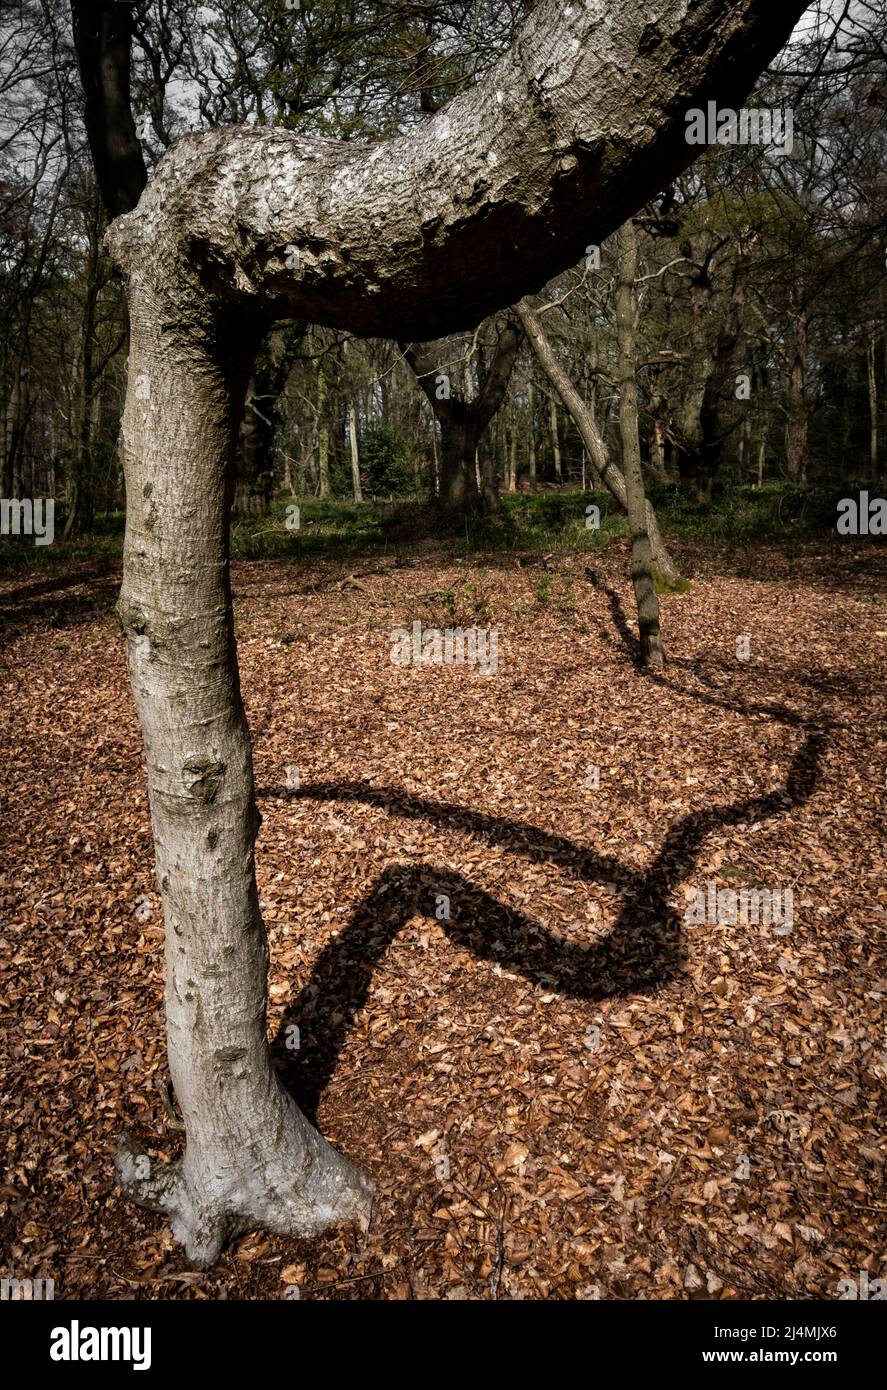 The shadow of an old bent and twisted tree falls on the ground in woodland, Worcestershire, England. Stock Photo